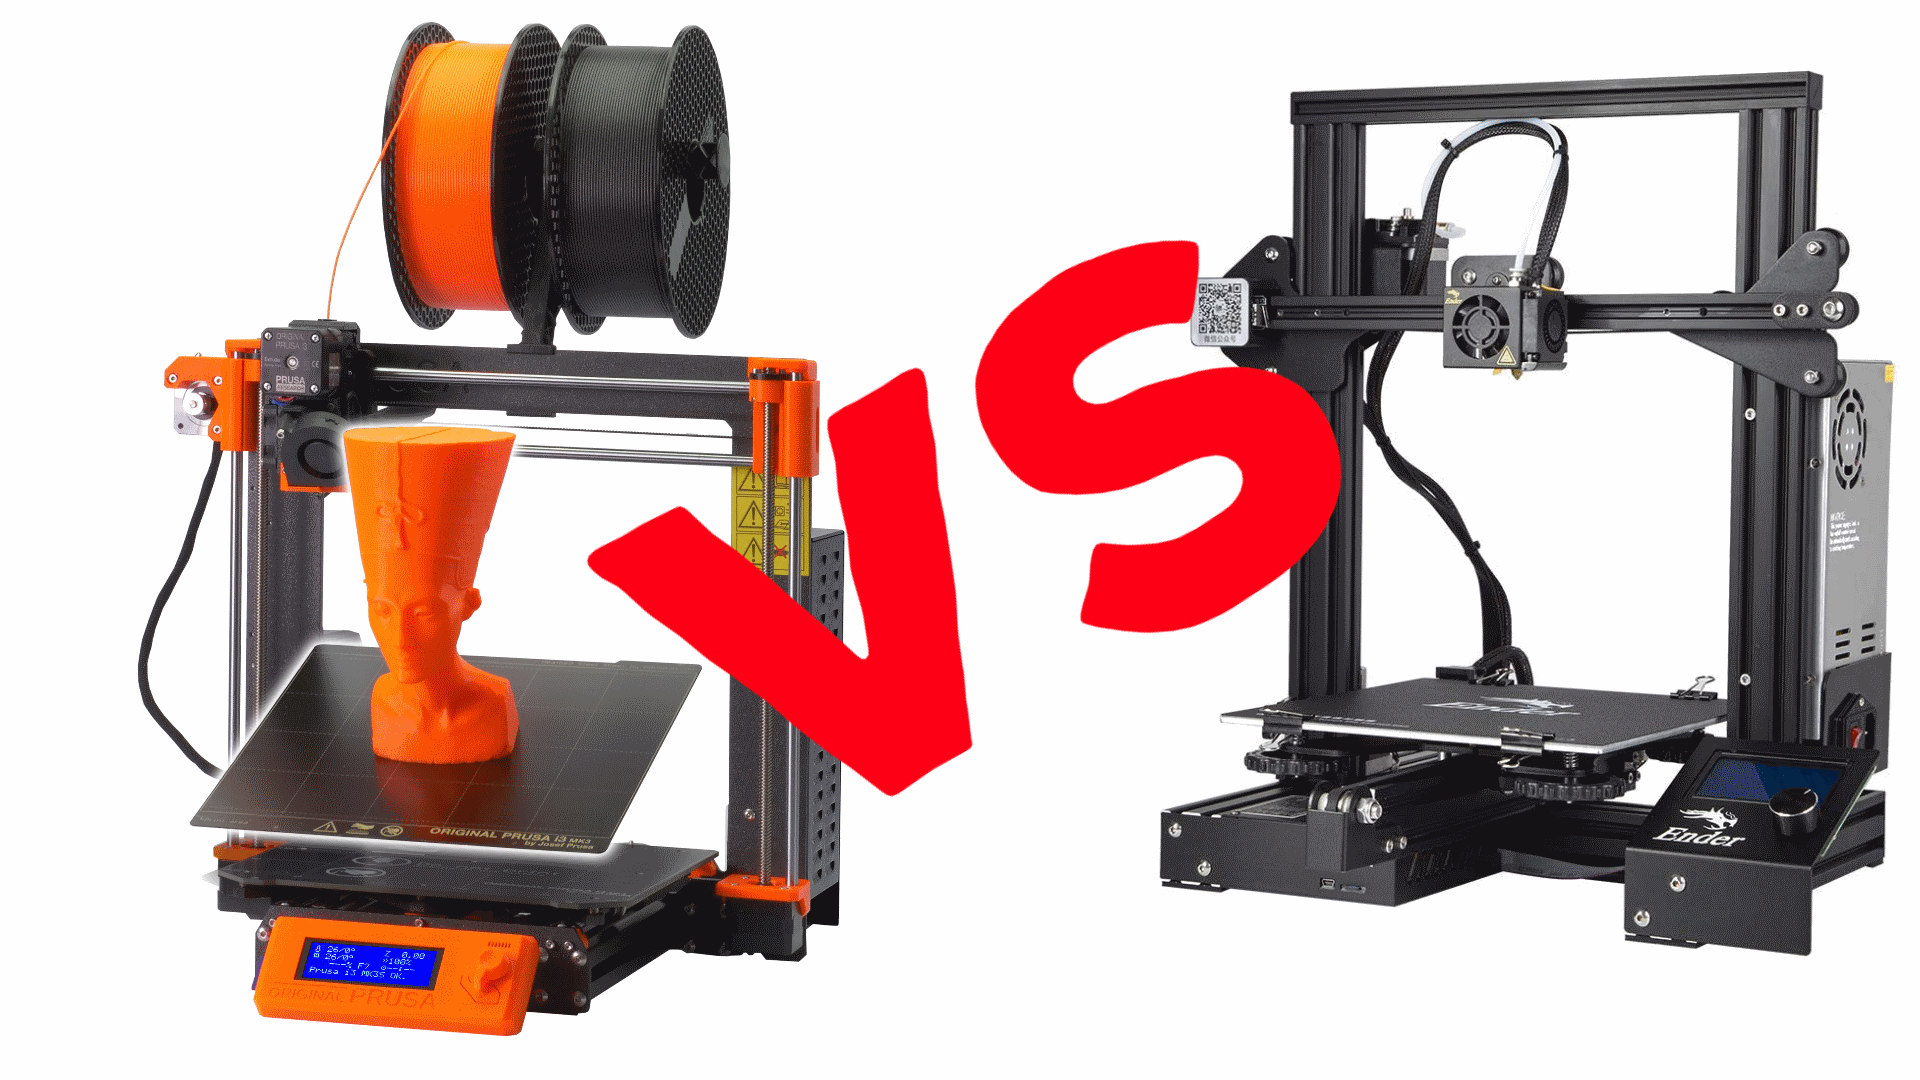 Buying a first 3D printer, Prusa or Ender?